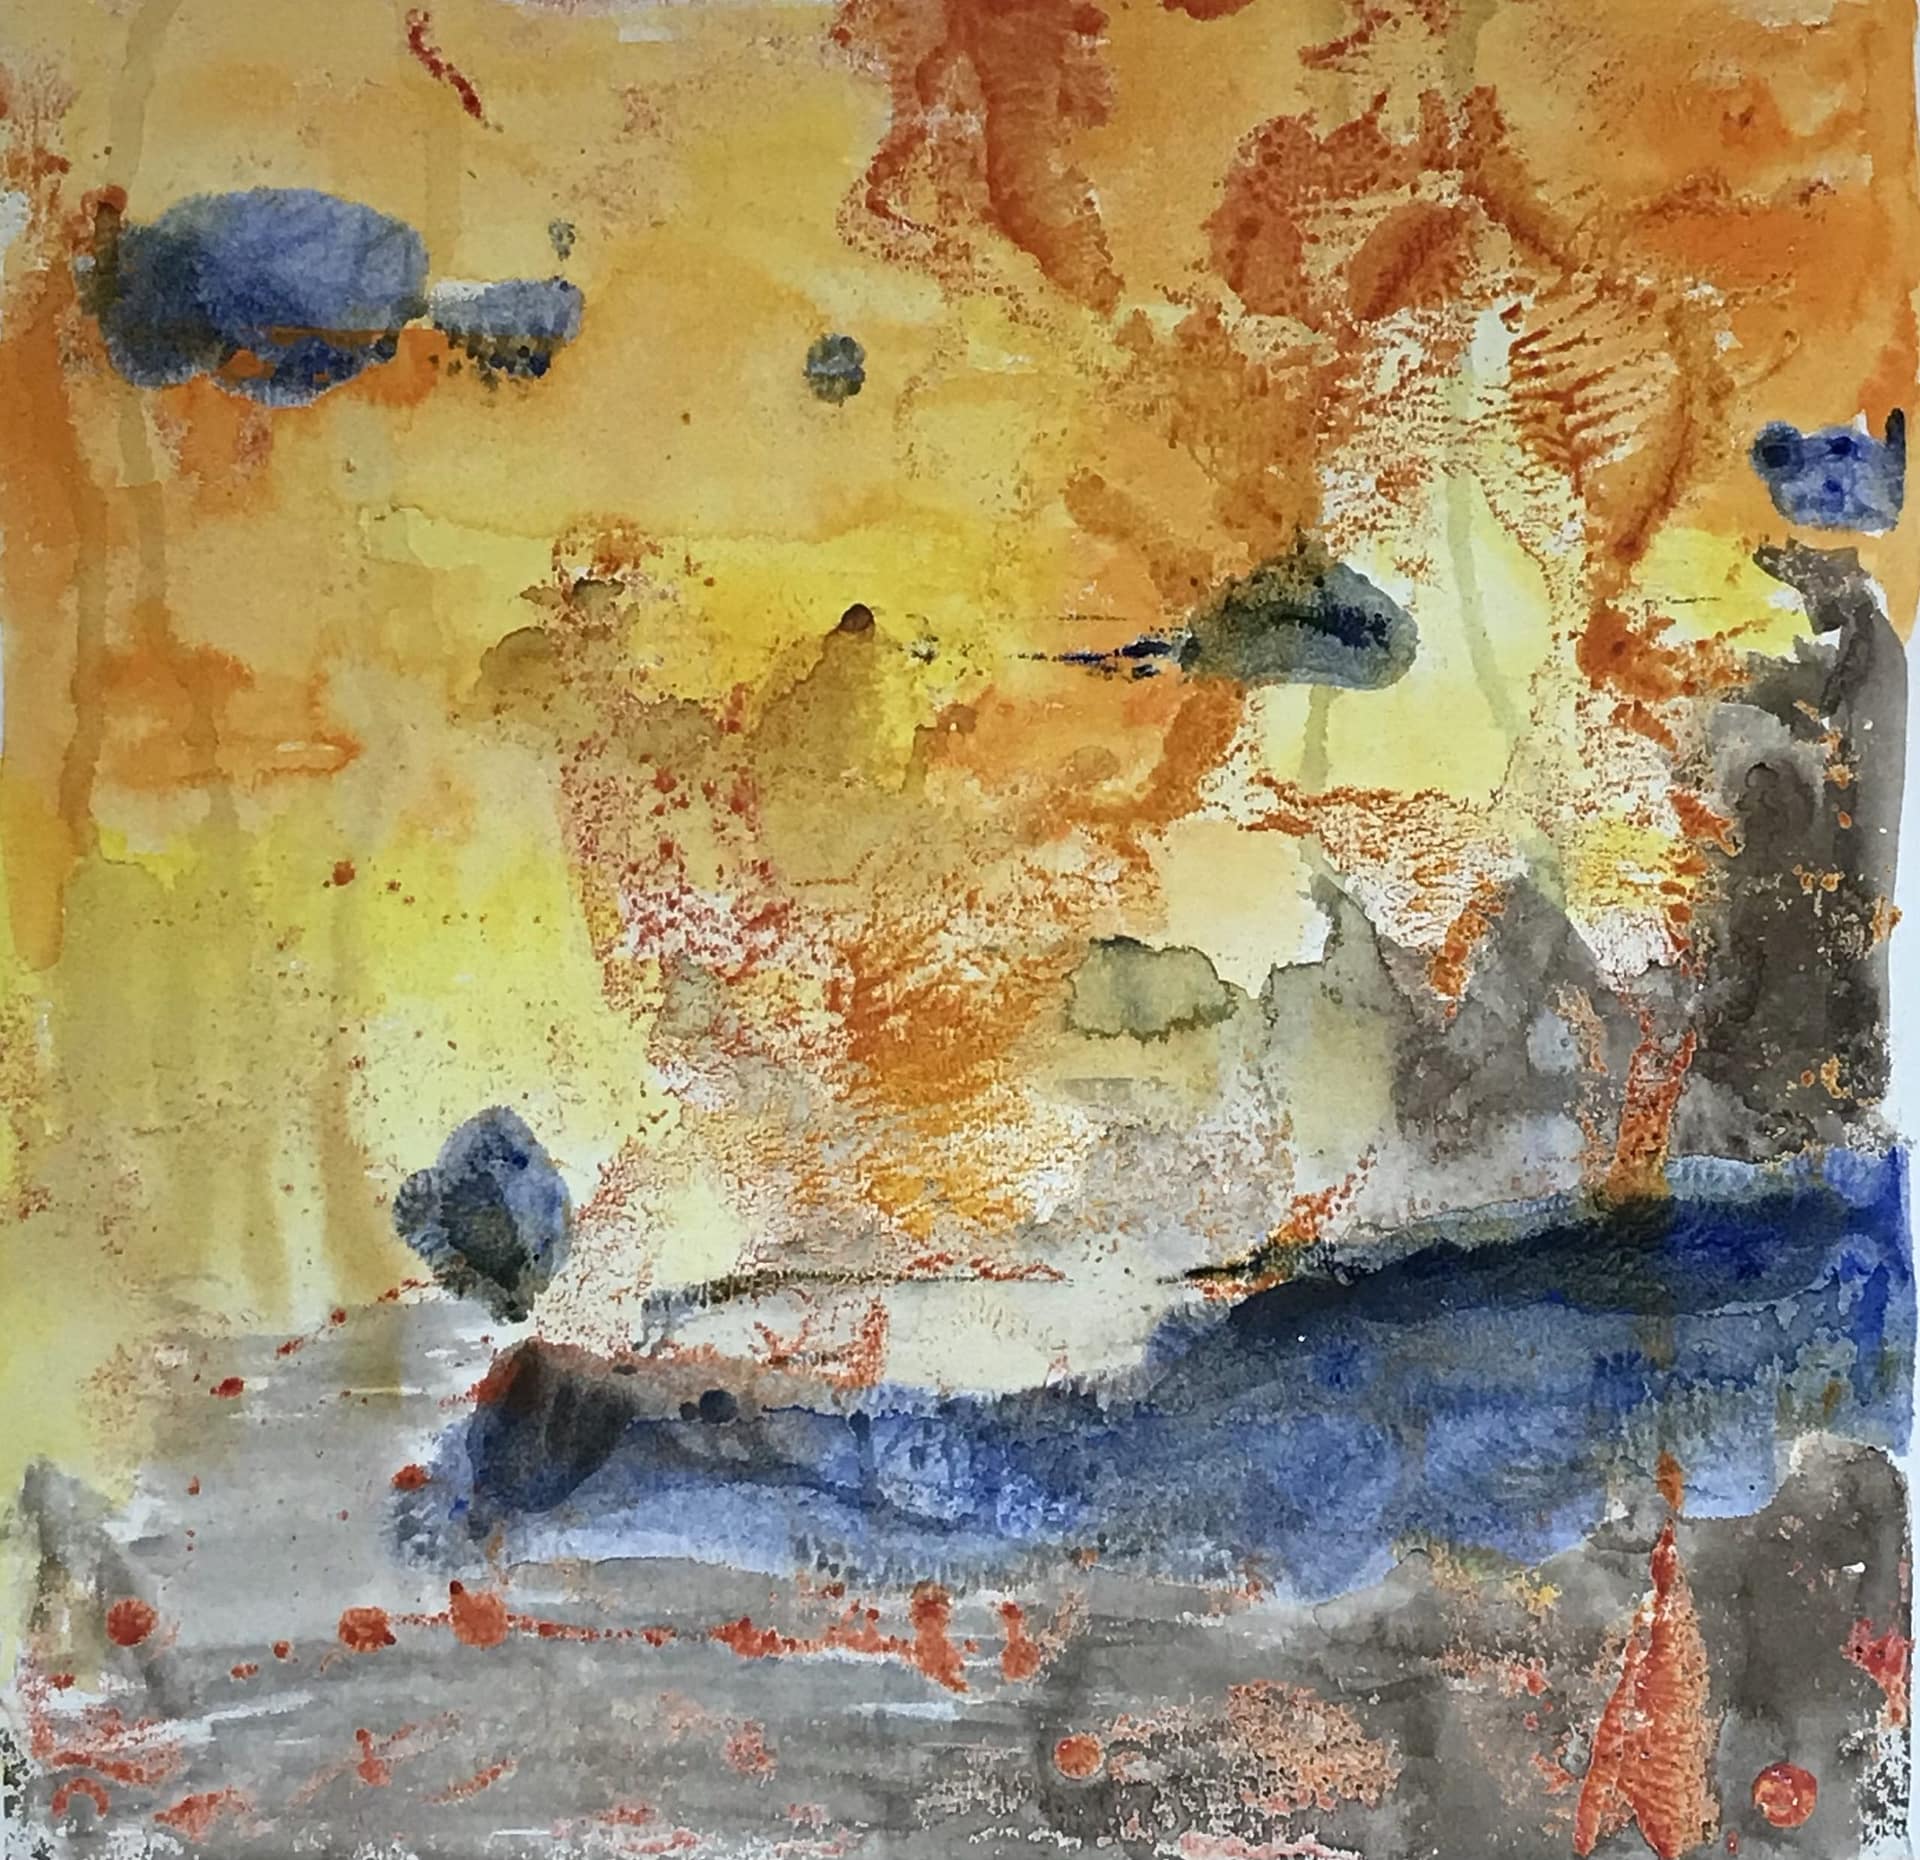 abstract encaustic art on paper, blue, orange red, and grey